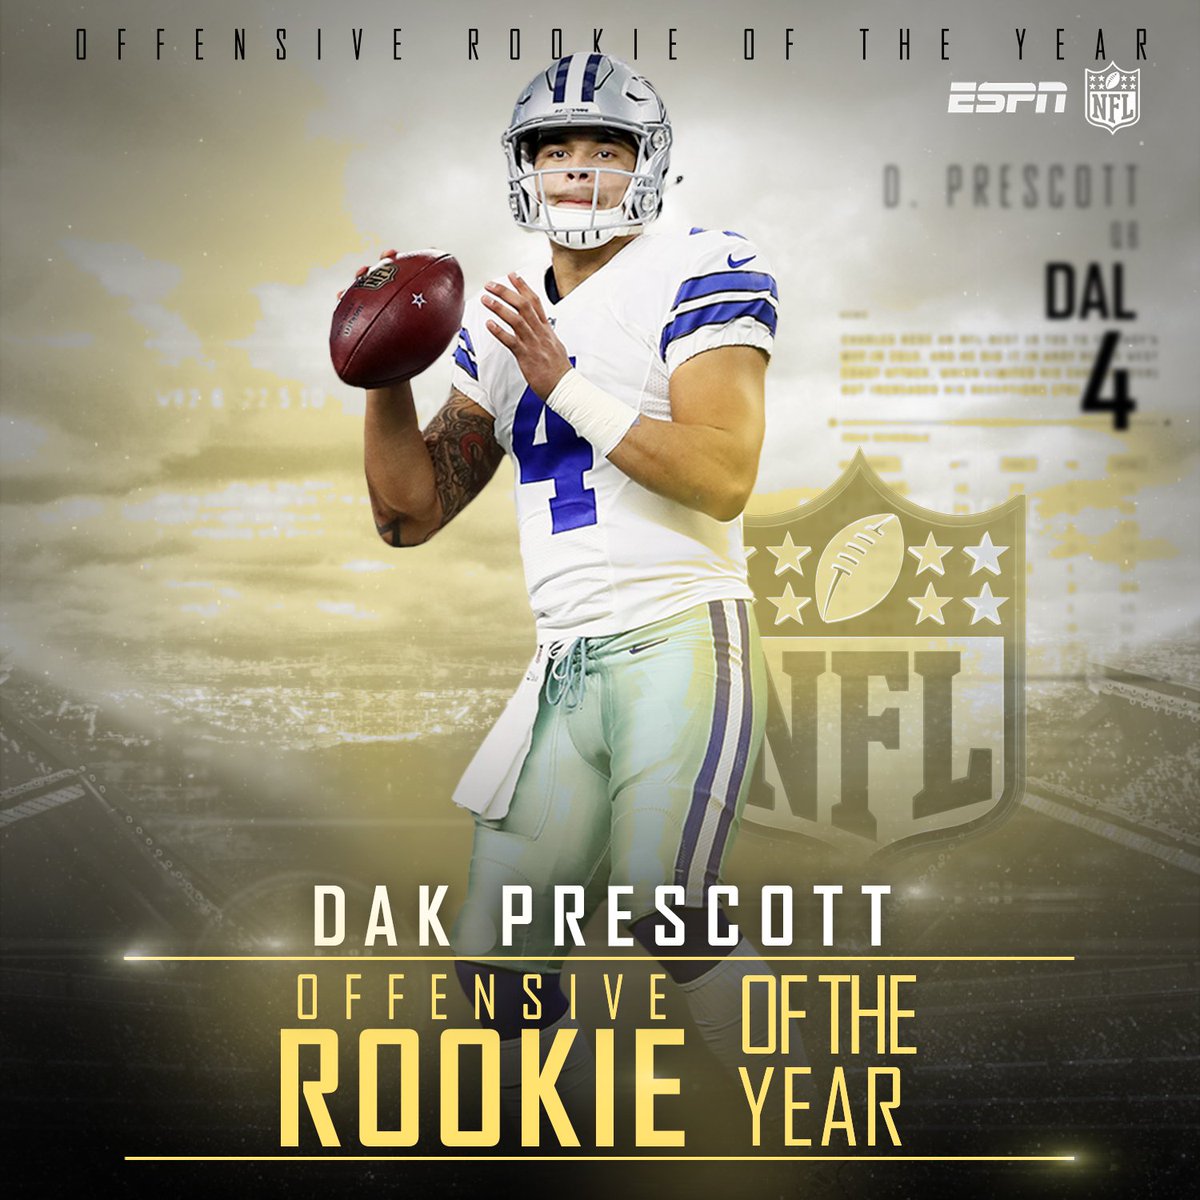 nfl offensive rookie of the year